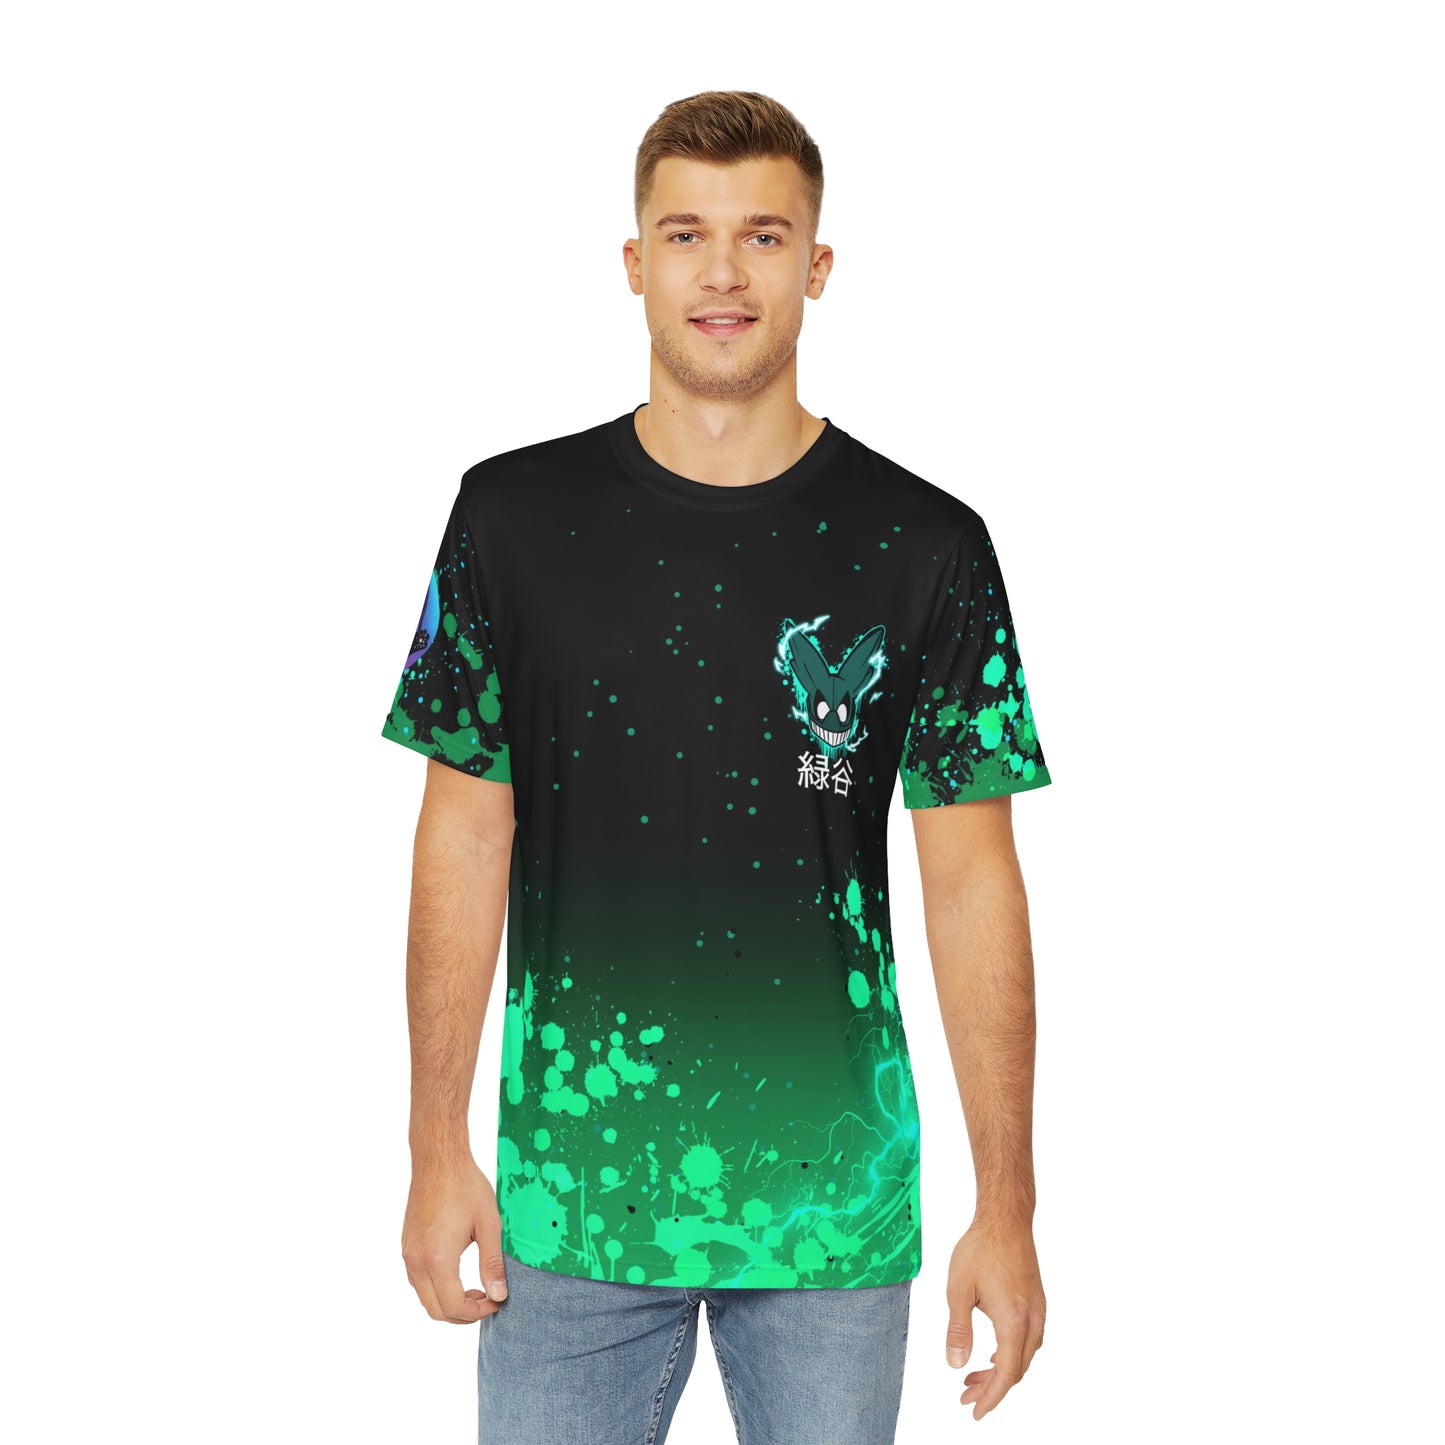 Beacon of hope all over print shirt